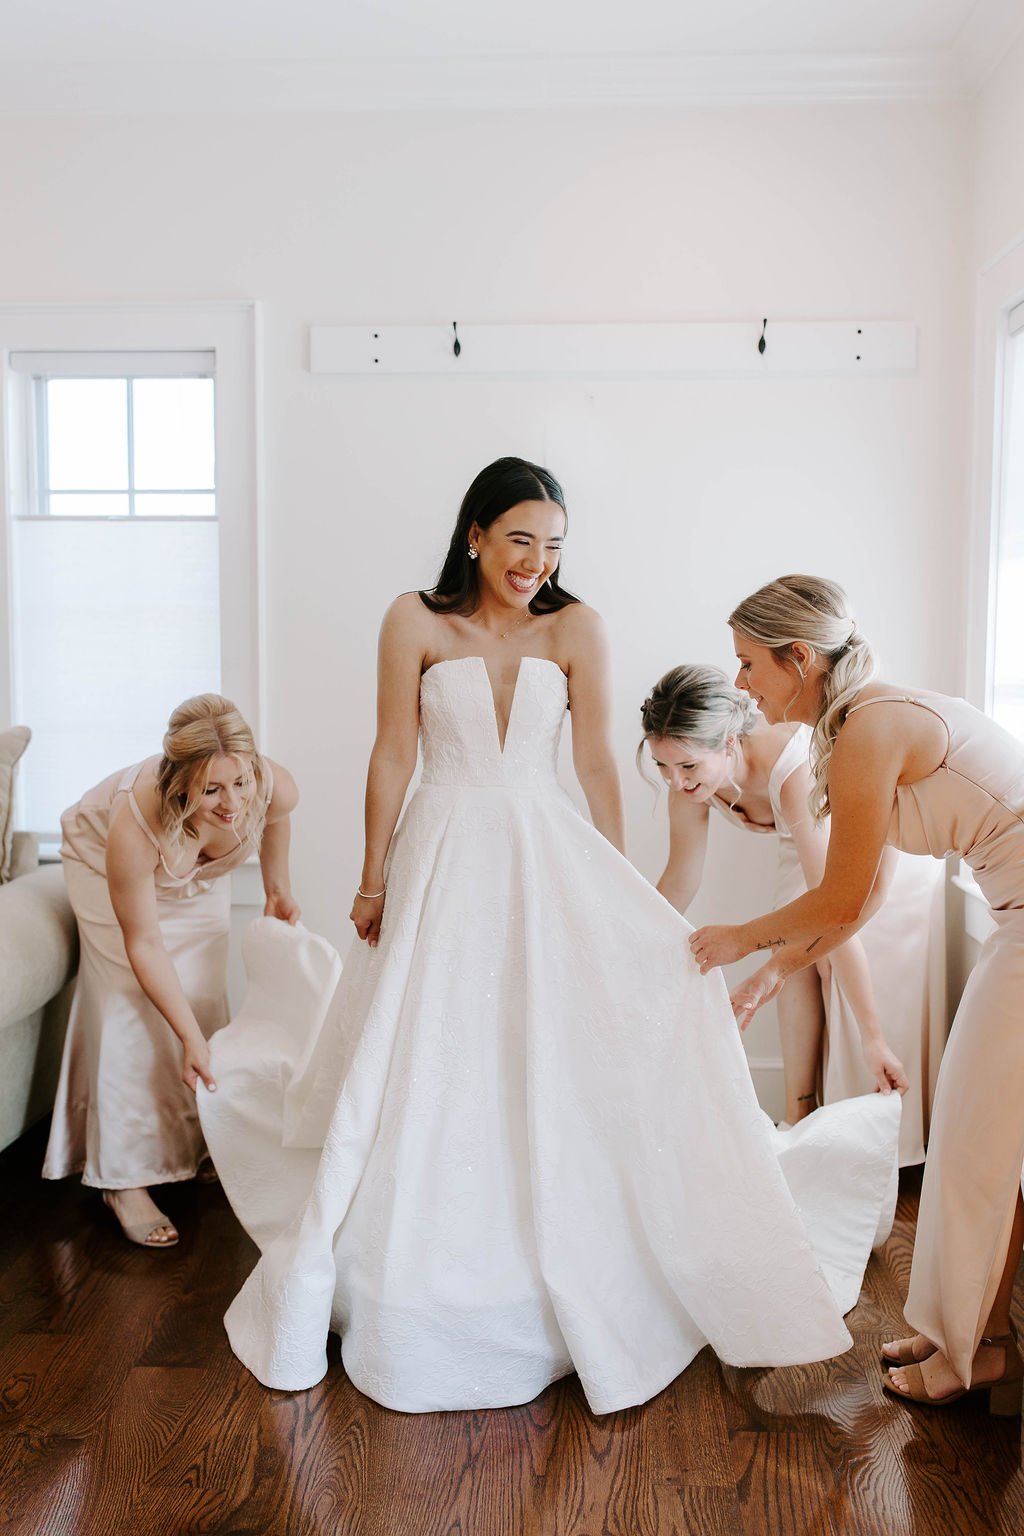 Bride smiling while her bridesmaids help her get ready for her barn wedding